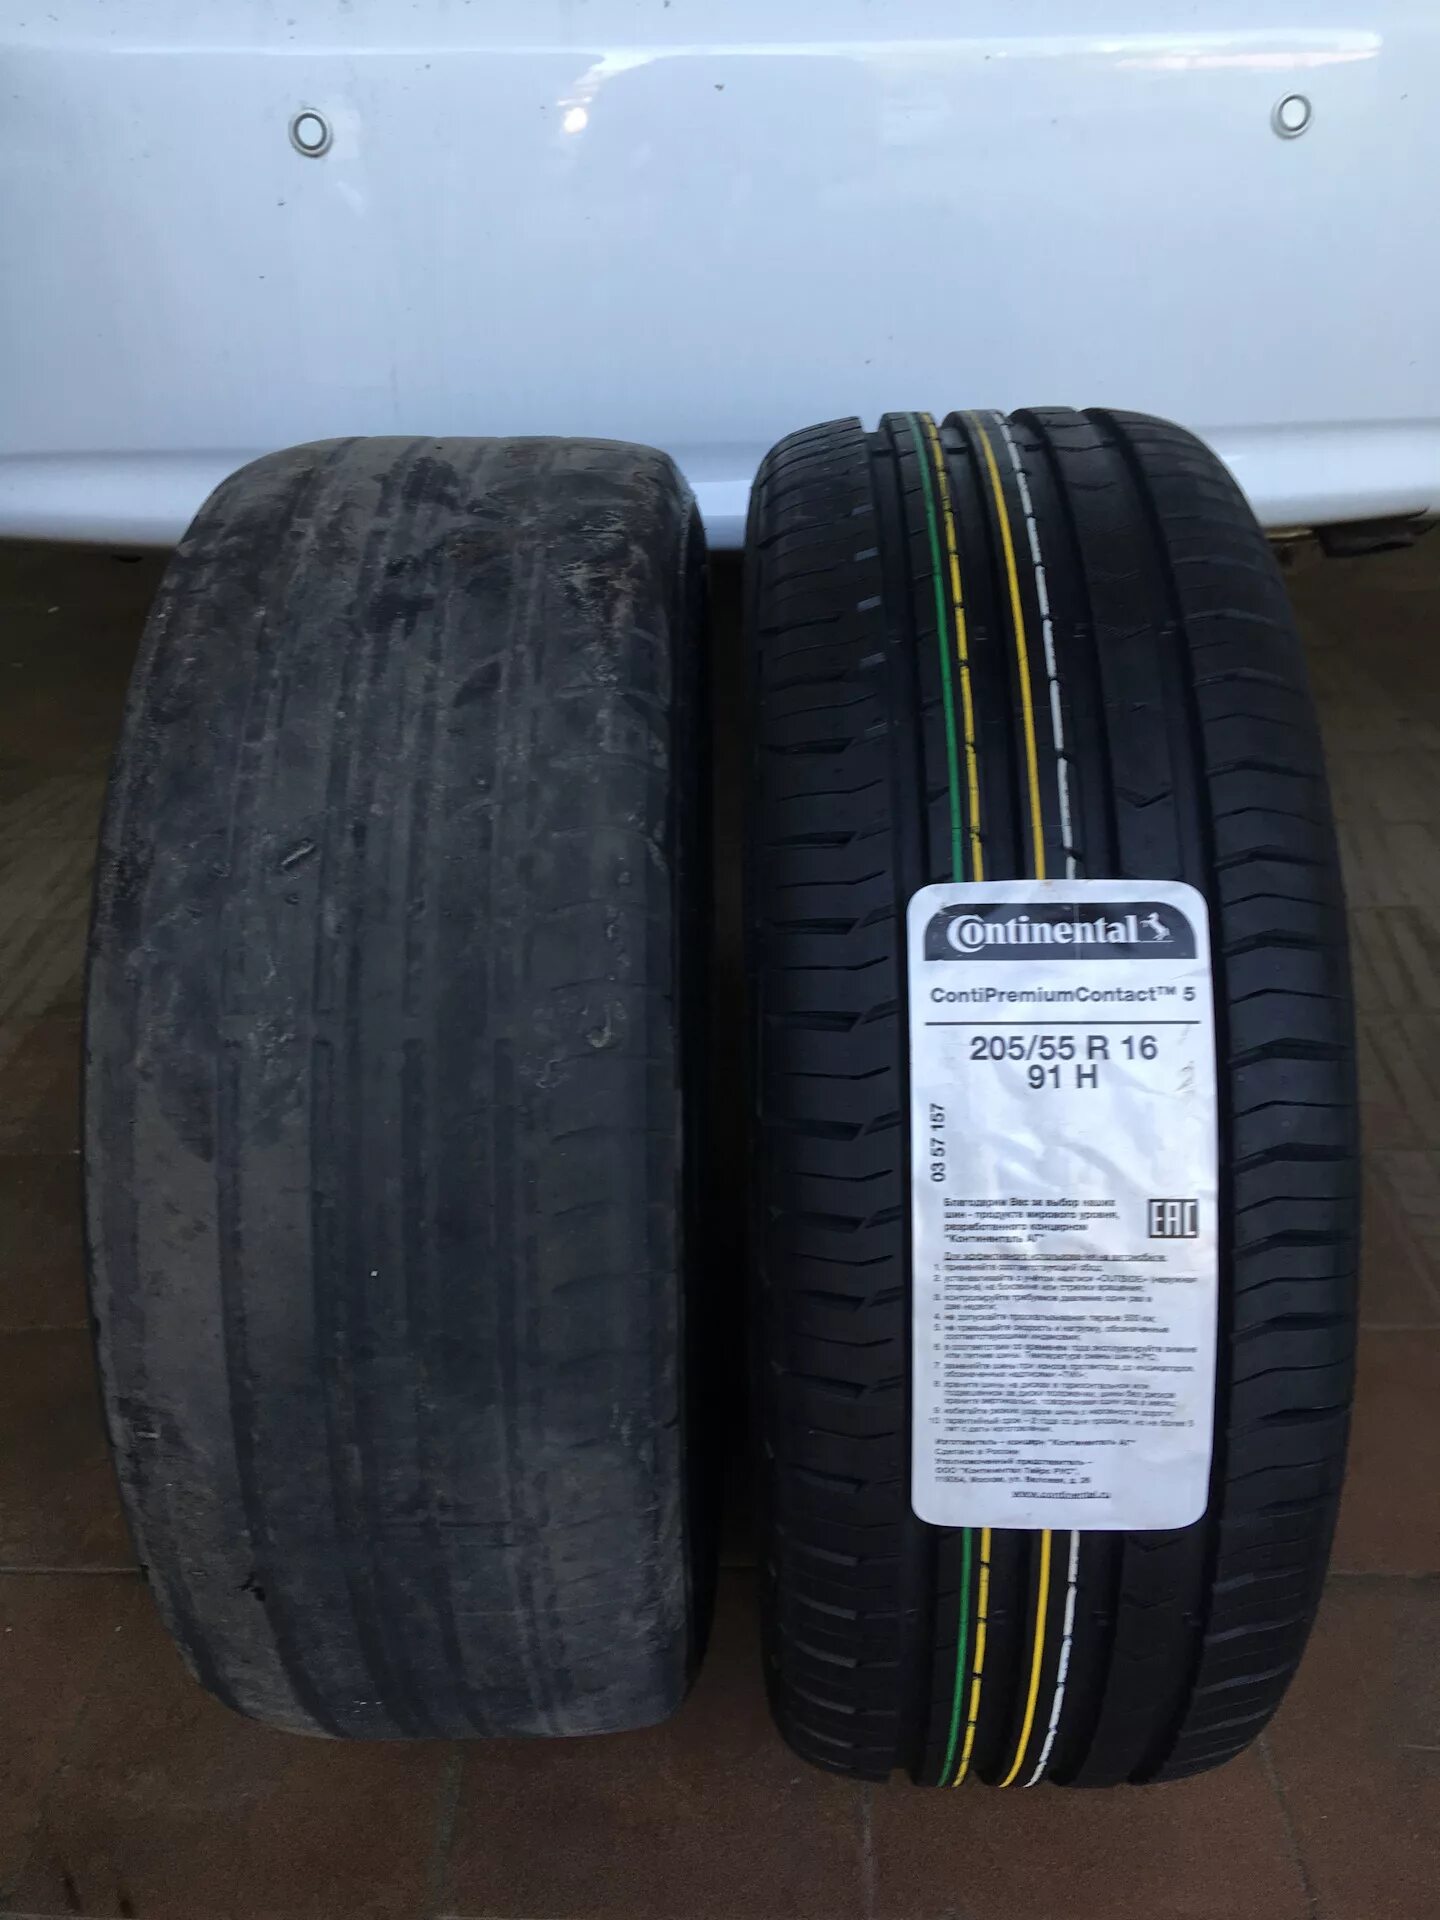 Continental PREMIUMCONTACT 205/55 r16. Continental PREMIUMCONTACT 5 205/55 r16. Continental CONTIPREMIUMCONTACT 205/55 r16. Continental PREMIUMCONTACT 6 205/55 r16.